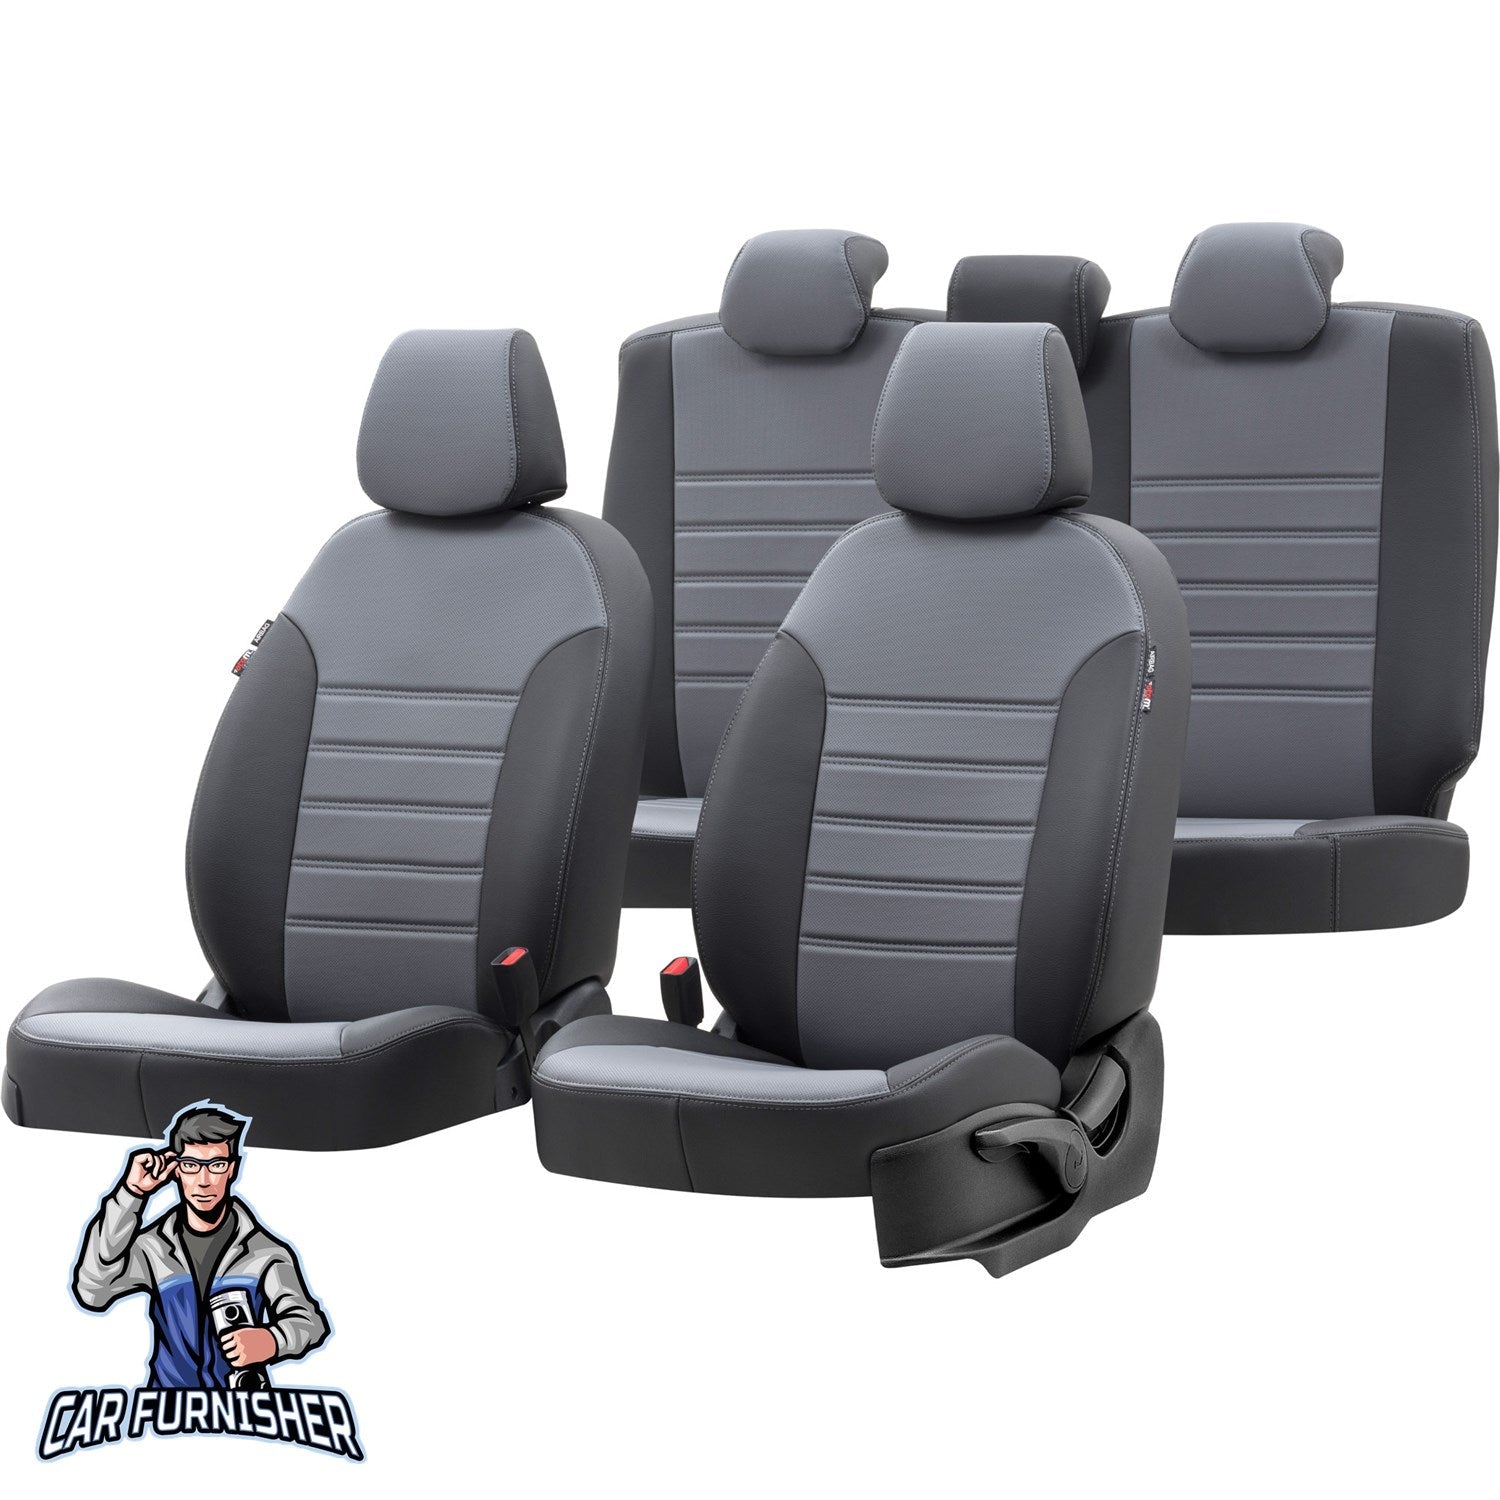 Fiat Marea Car Seat Covers 1996-2007 Istanbul Design Smoked Black Full Set (5 Seats + Handrest) Leather & Fabric